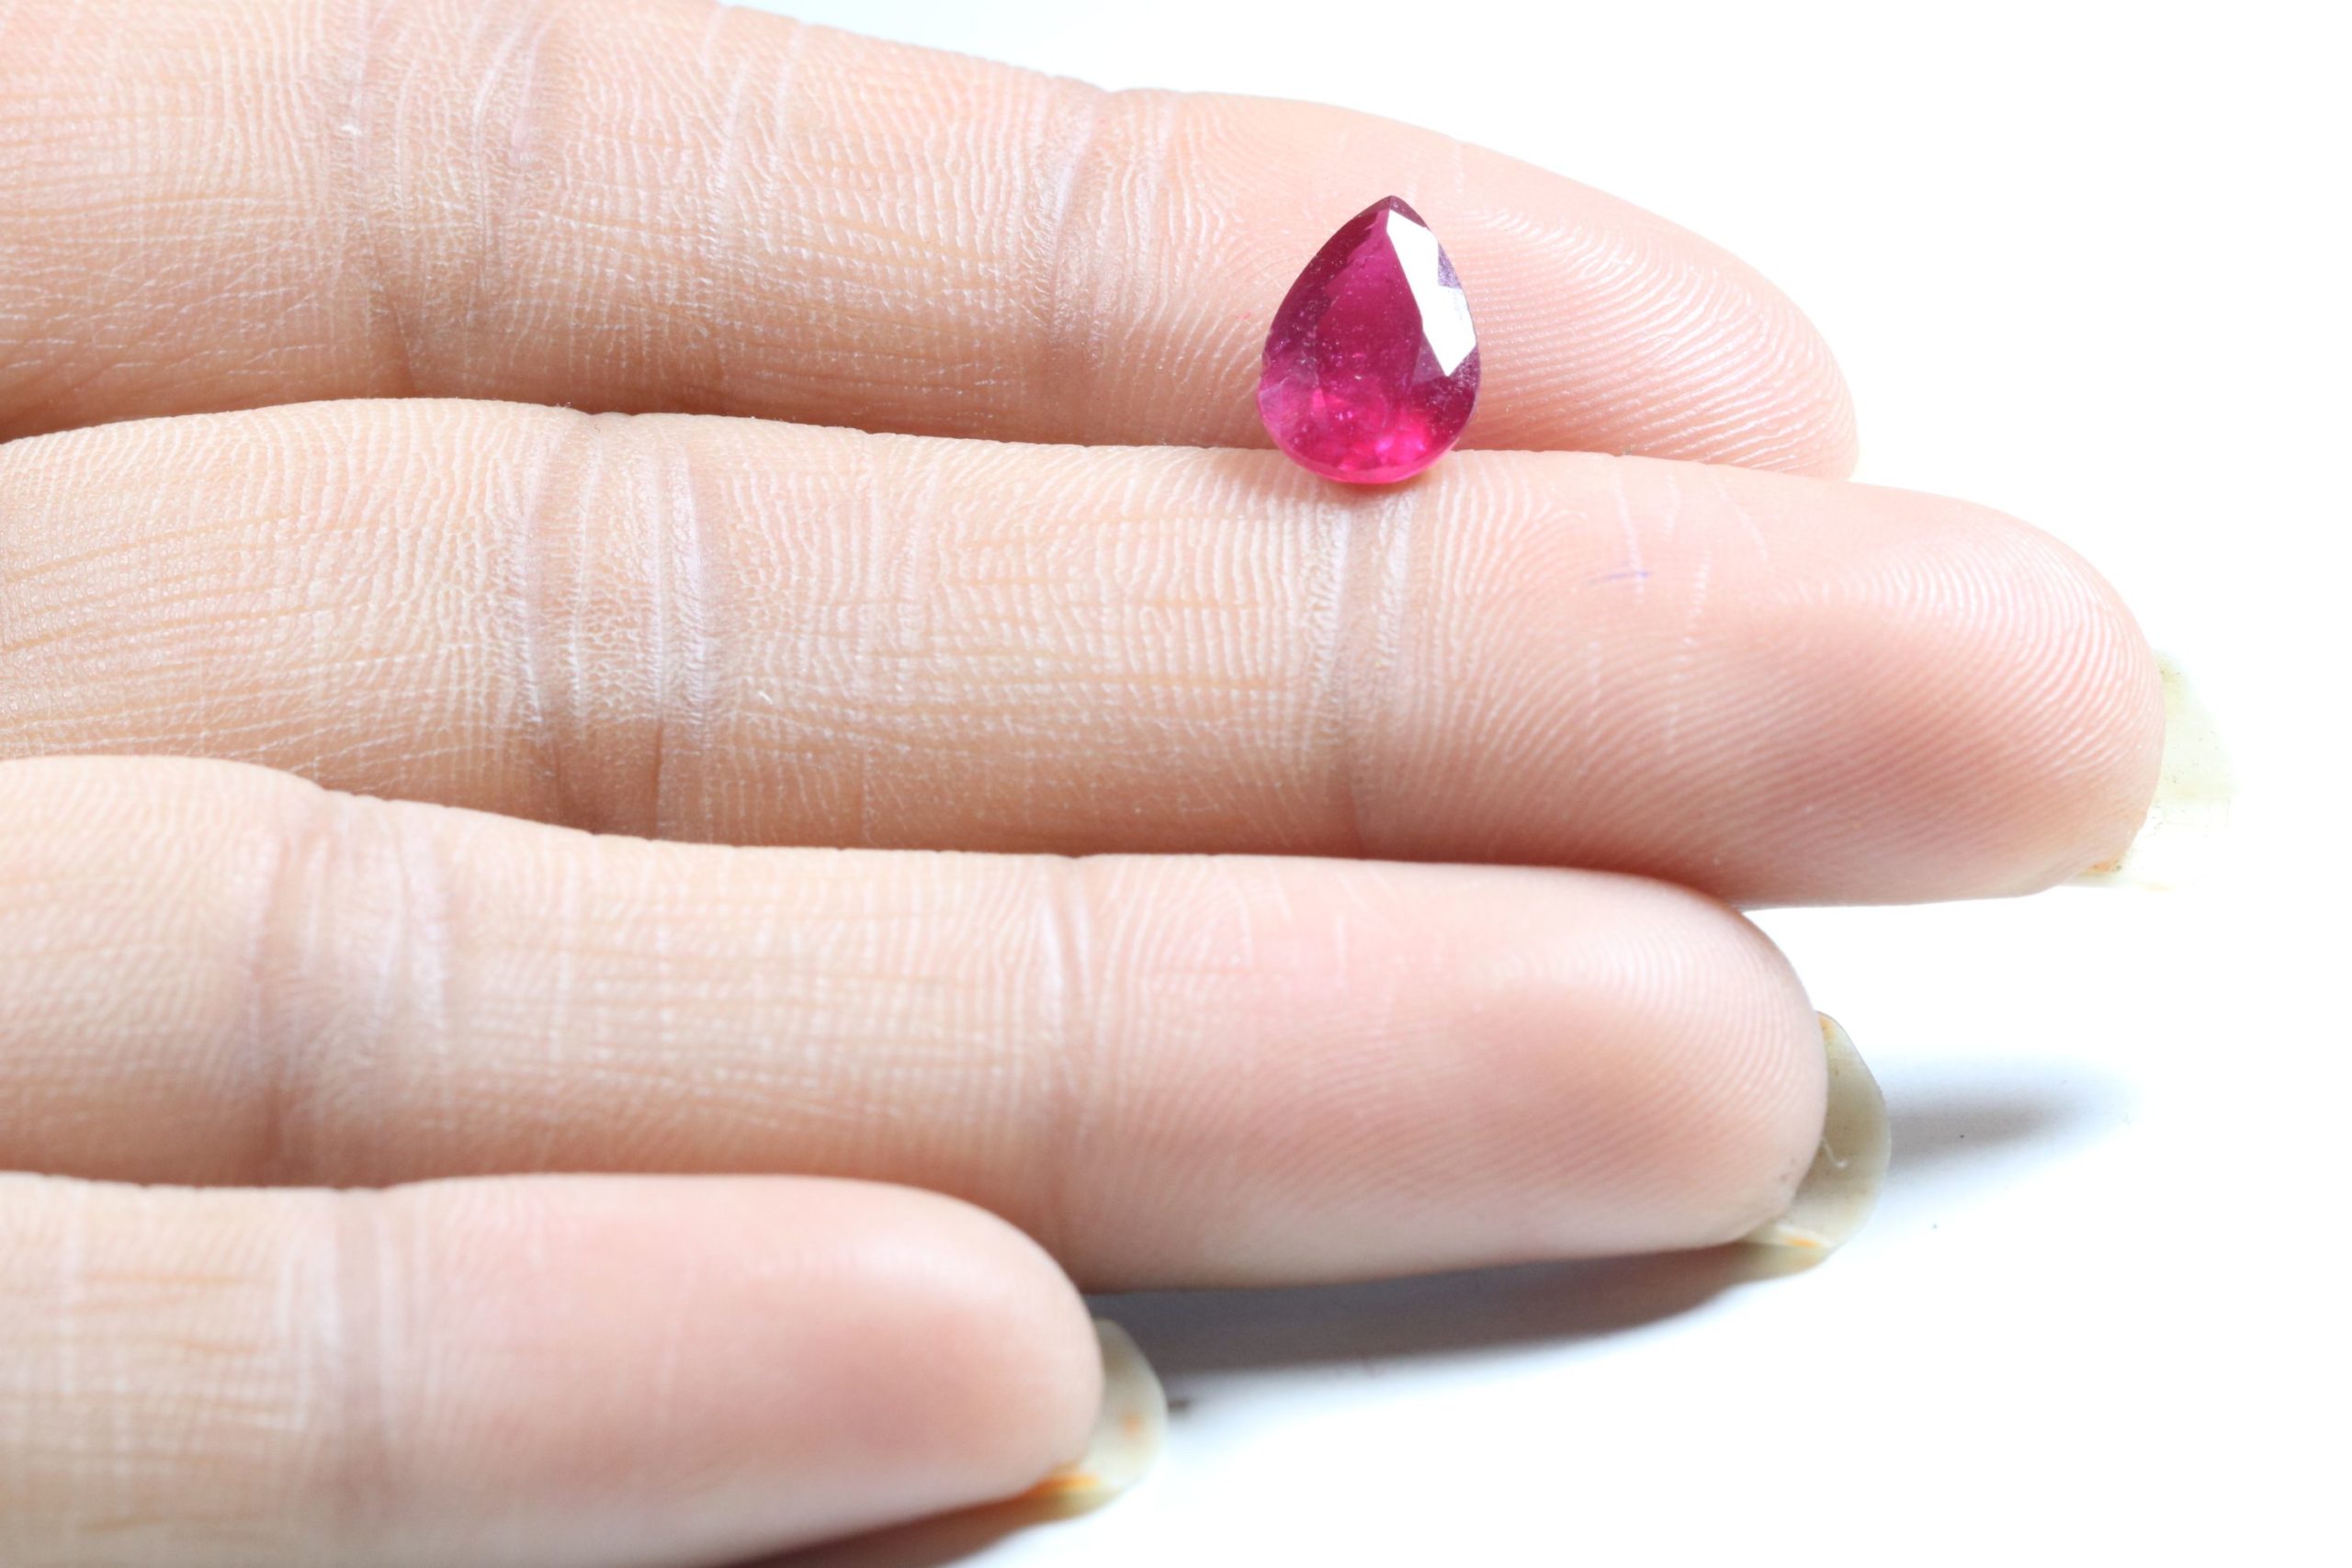 Ruby 2.39 Ct.